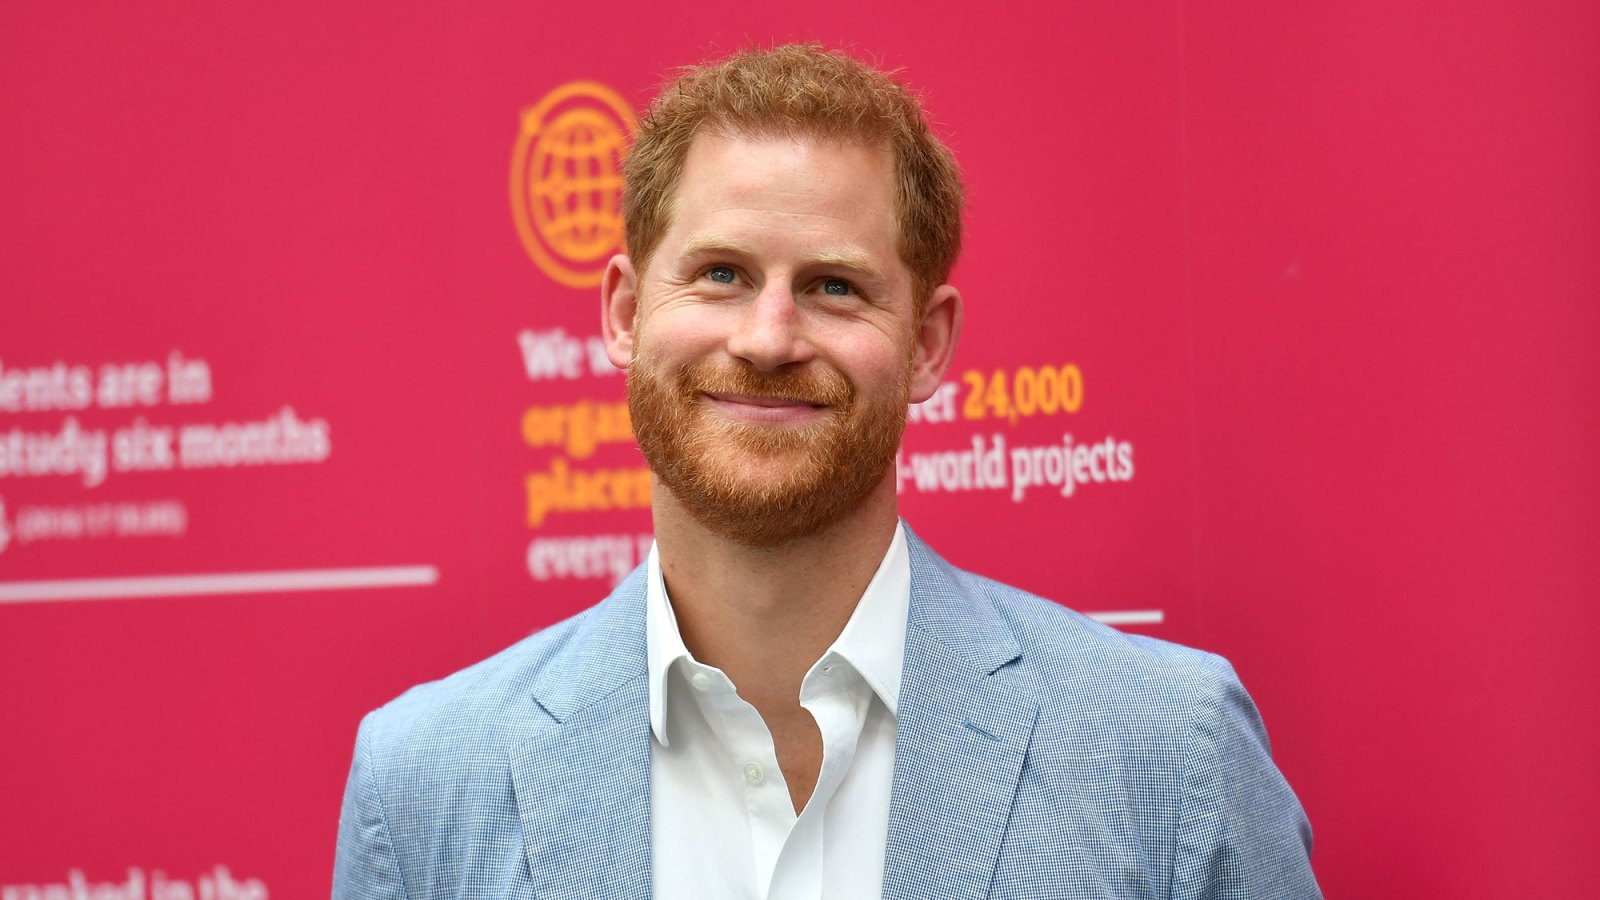 Prince Harry Makes Time for Self-Care Raising Son Archie and Daughter Lilibet